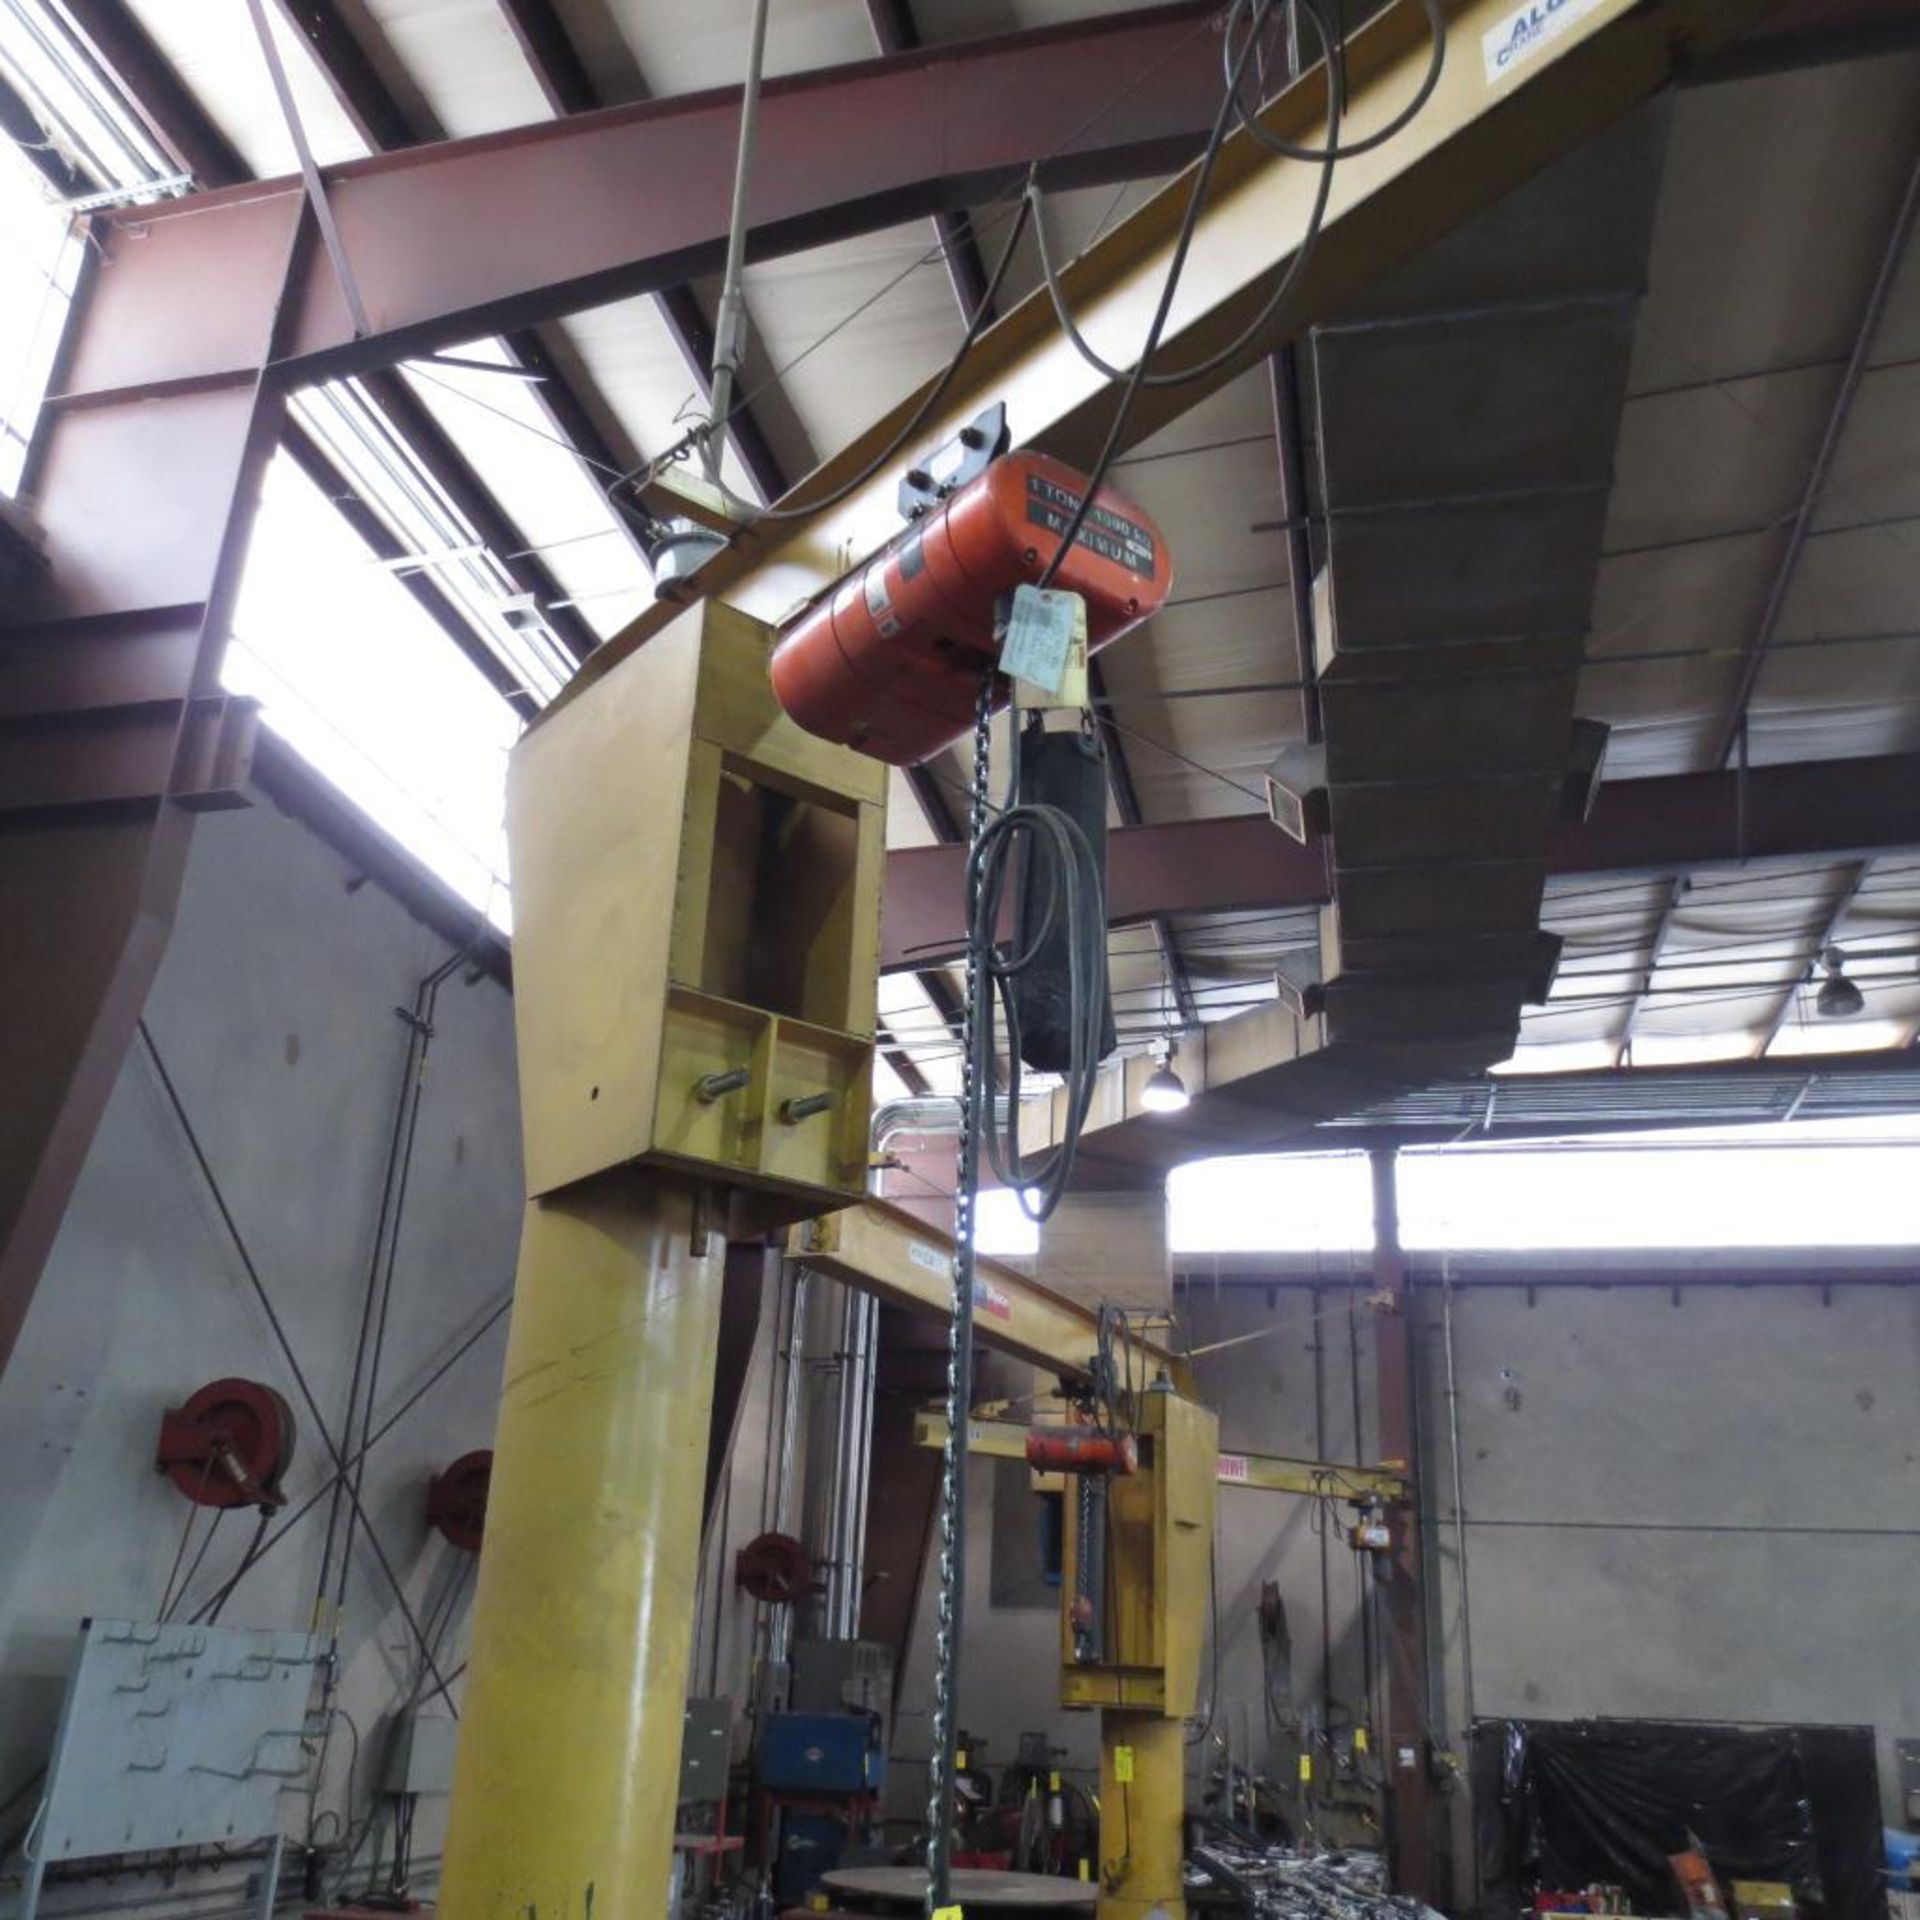 Algo 1 Ton Floor Mounted Jib Est 12' Tall X 10' Long with CM 1 Ton Electric Hoist - Image 2 of 4